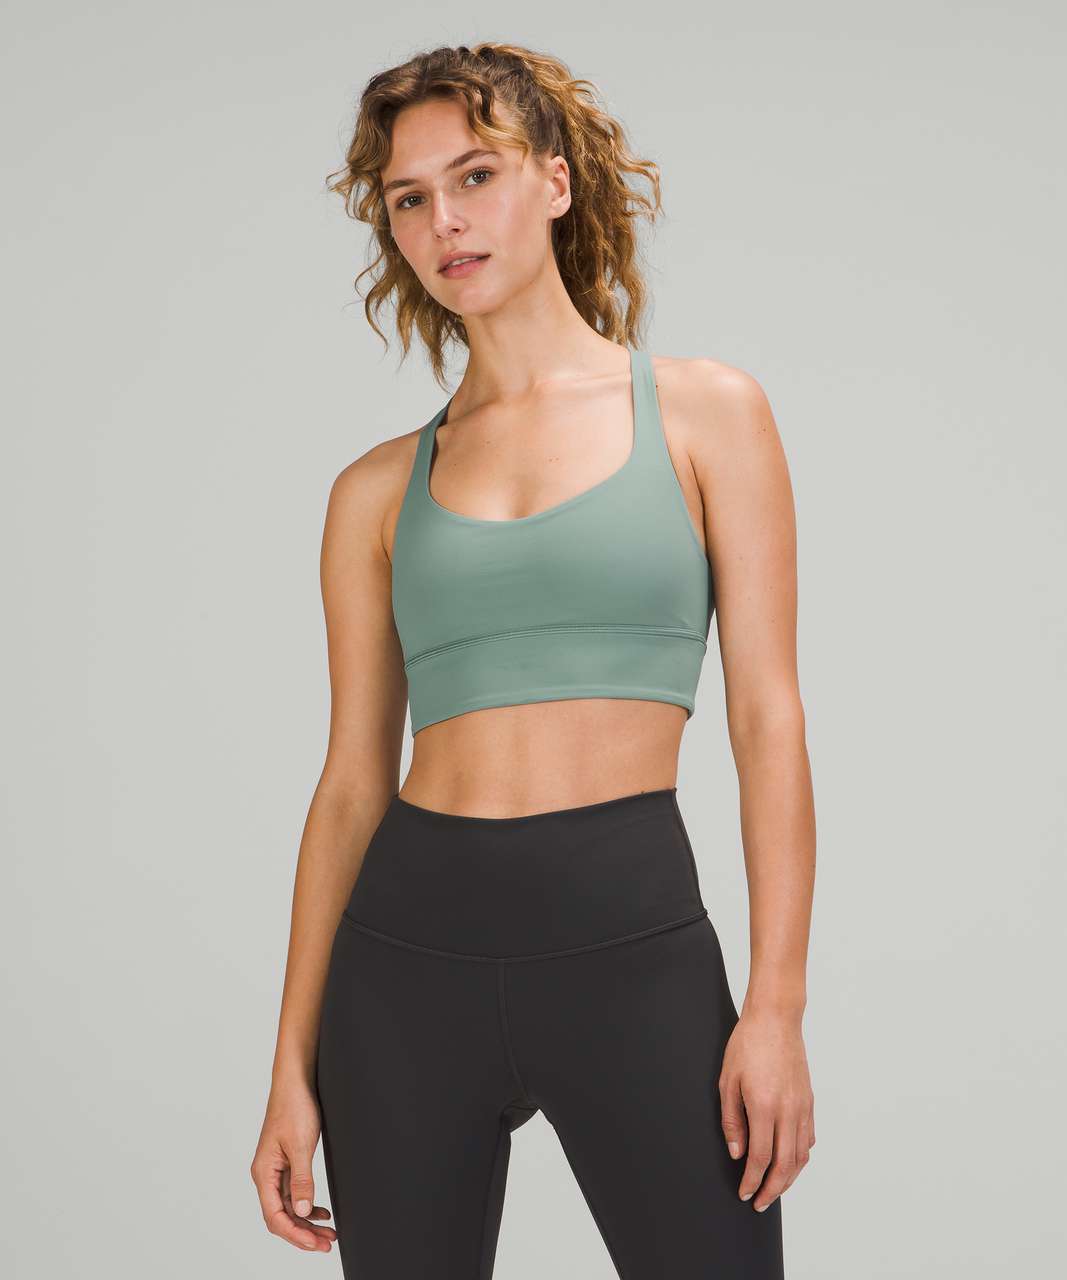 Lululemon Free to Be Long-Line Bra - Wild *Light Support, A/B Cups - Tidewater Teal